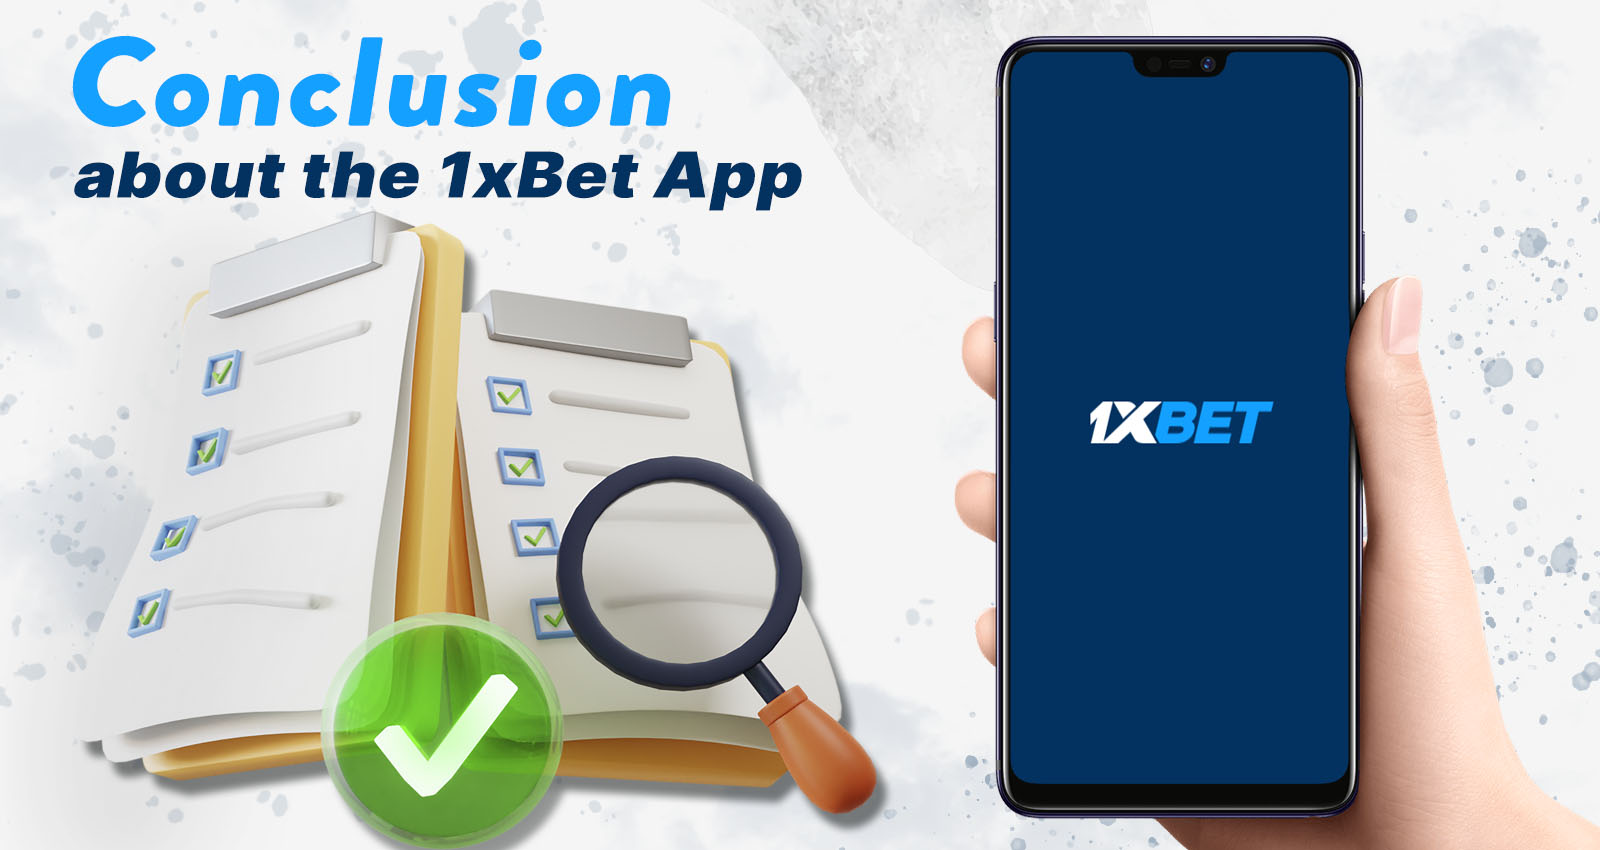 Conclusion about the 1xBet App